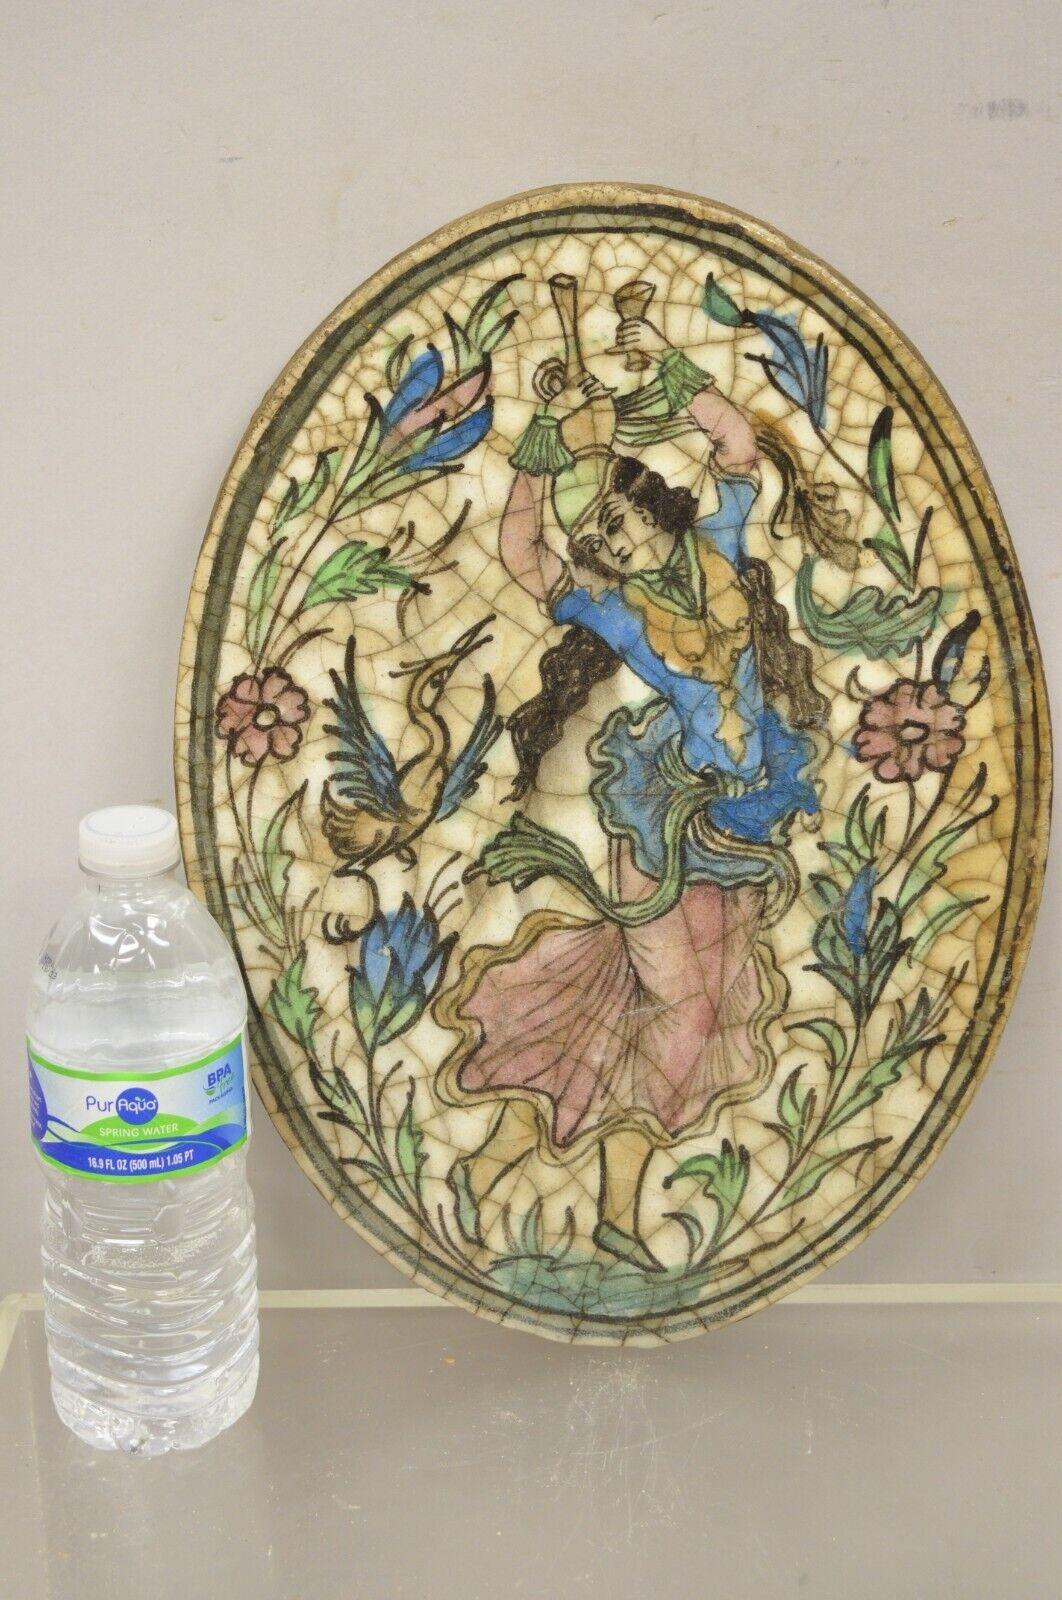 Antique Persian Iznik Qajar style ceramic pottery oval tile blue female dancer C3. Item features an original crackle glazed finish, heavy ceramic pottery construction, very impressive detail, wonderful style and form. Great to mount as wall art or